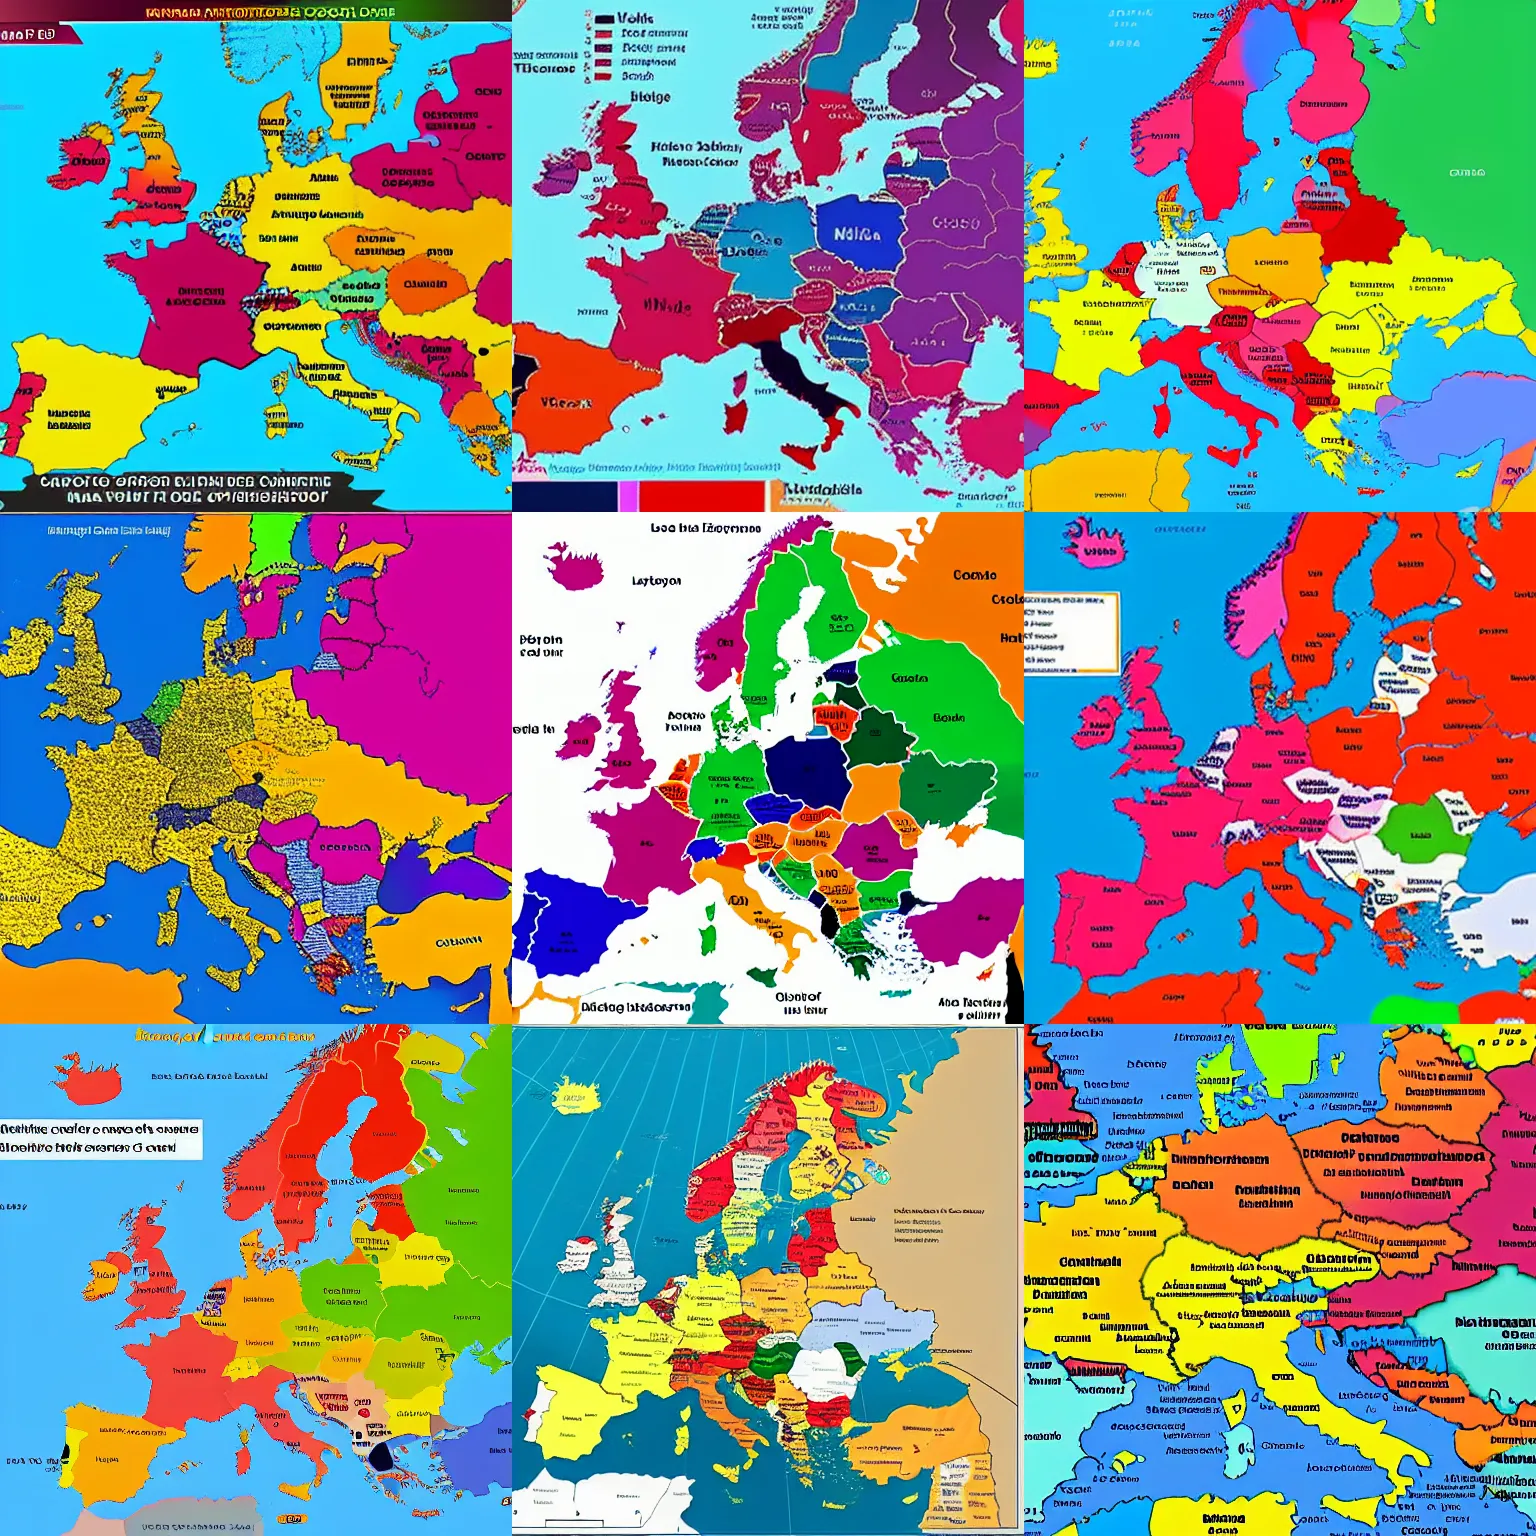 Prompt: map of europe, color coded where cost of living is cheaper